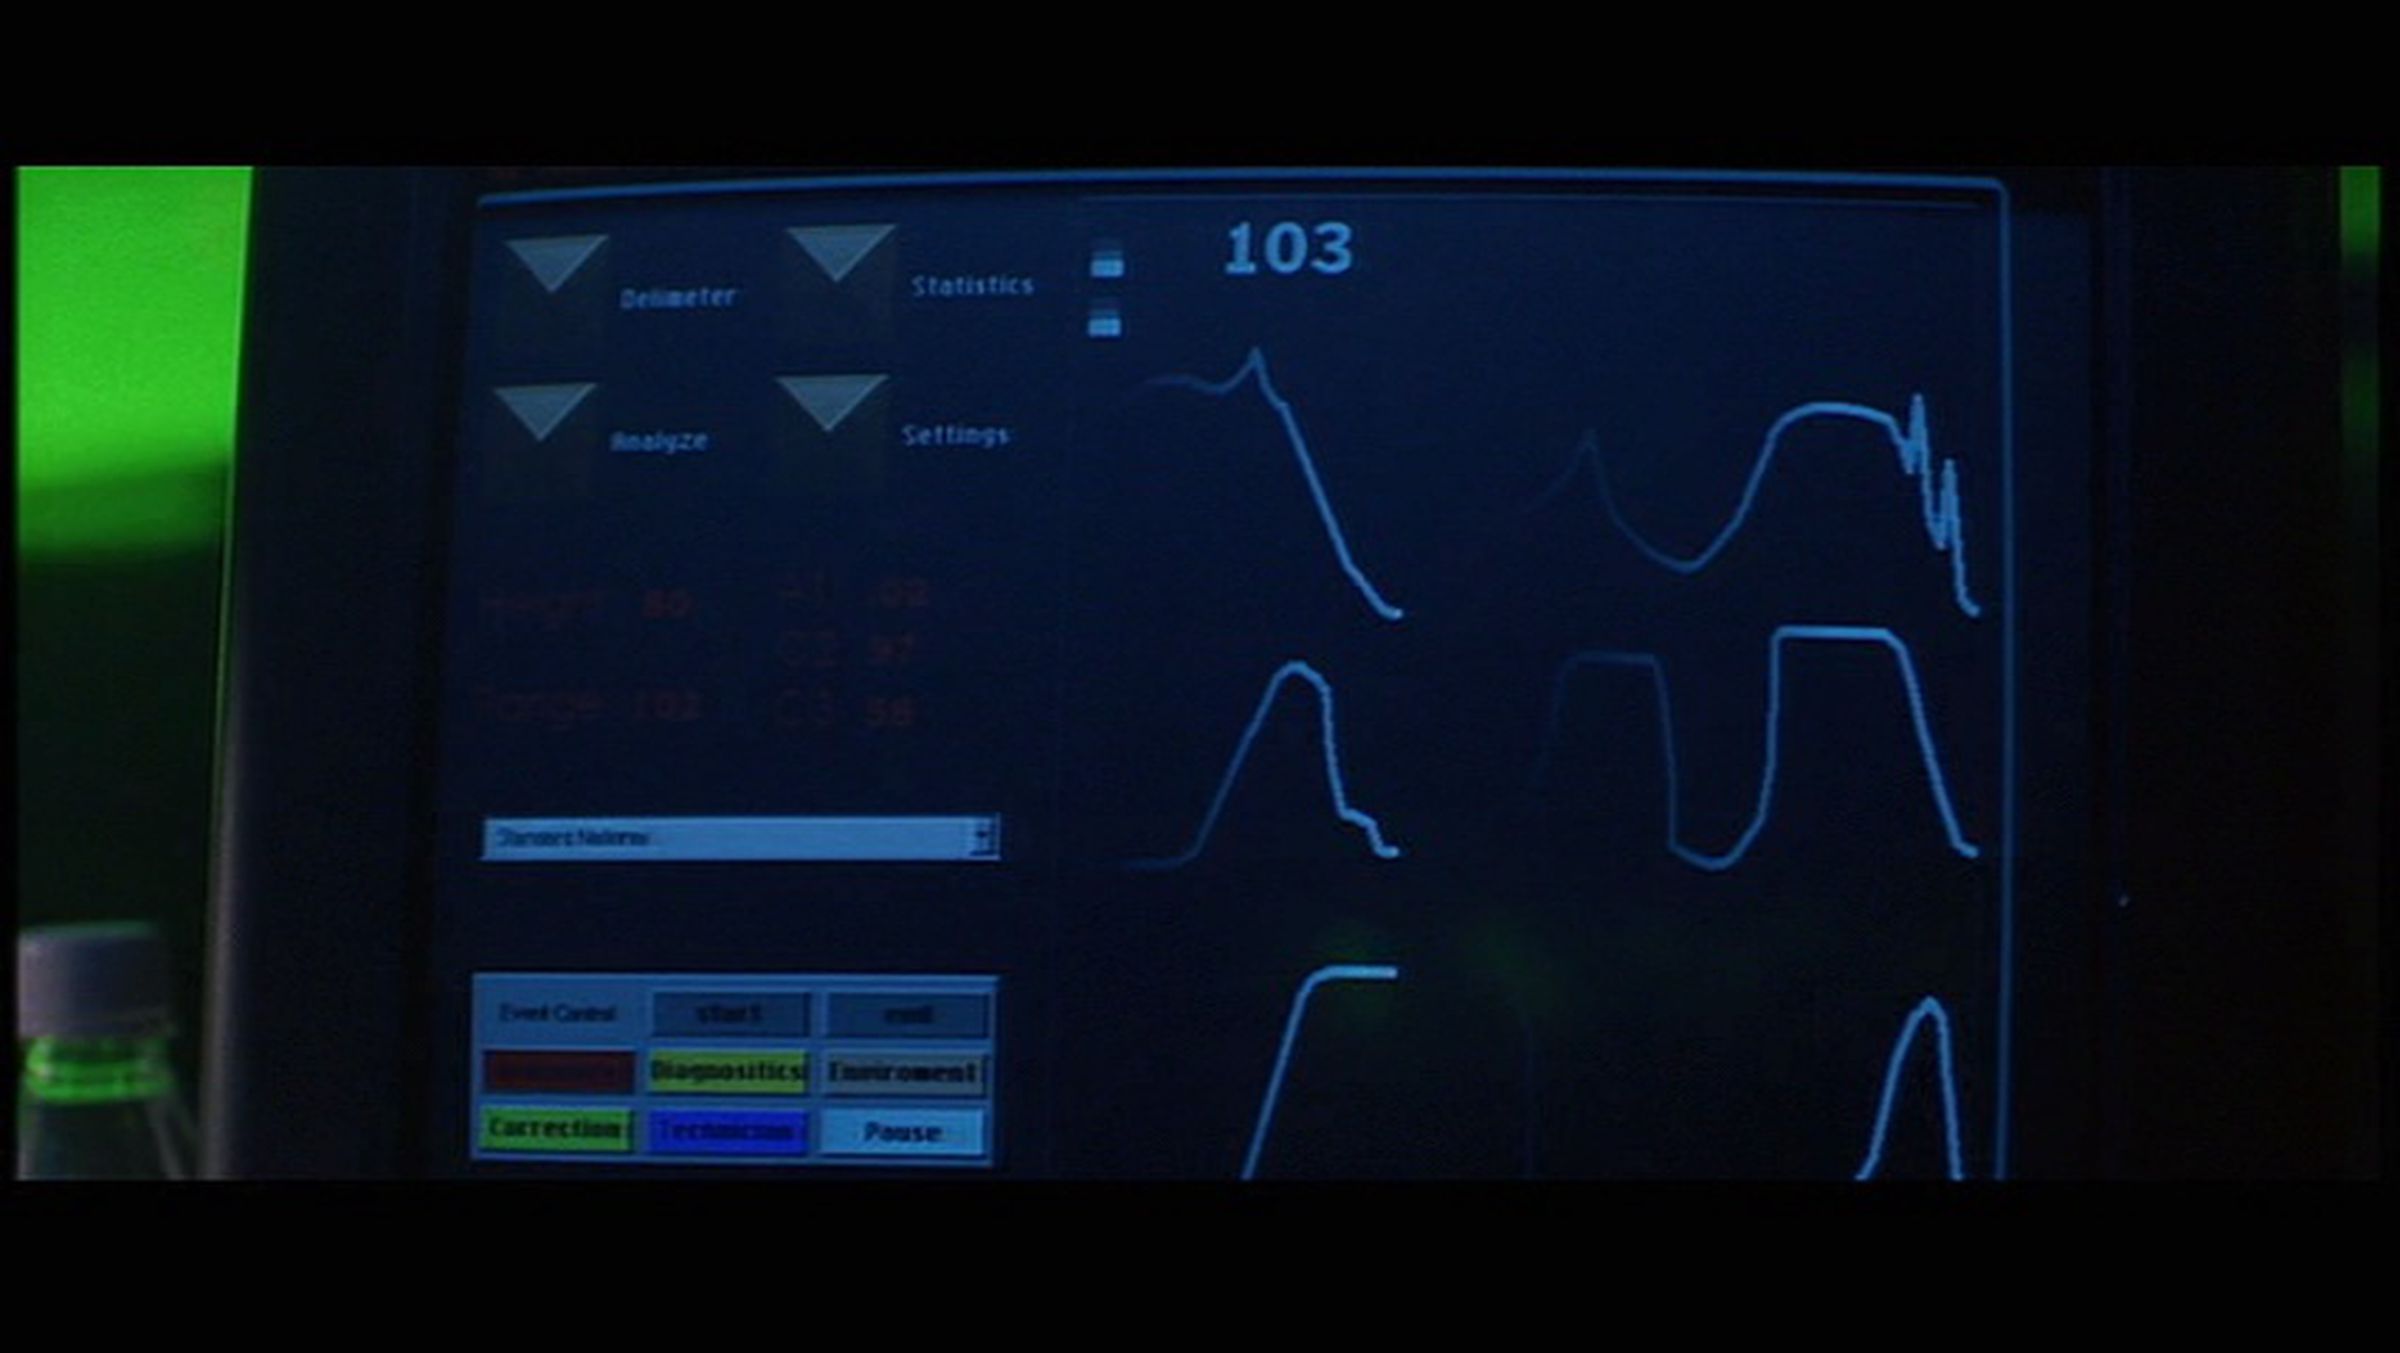 Computer interfaces from classic movies